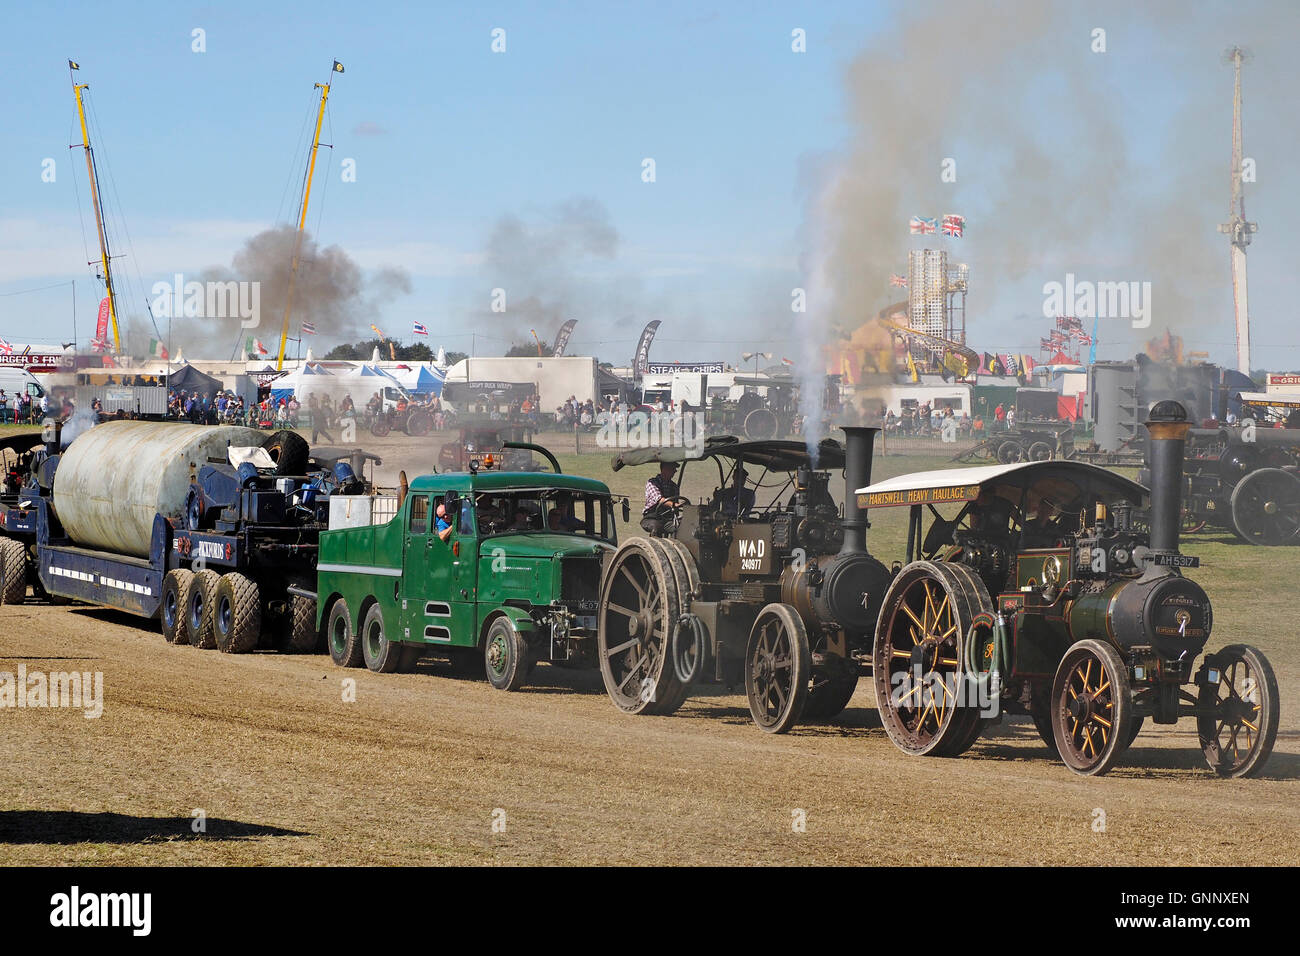 Demonstration of heavy haulage by steam traction engines at the Great Dorset Steam Fair 2016 Stock Photo